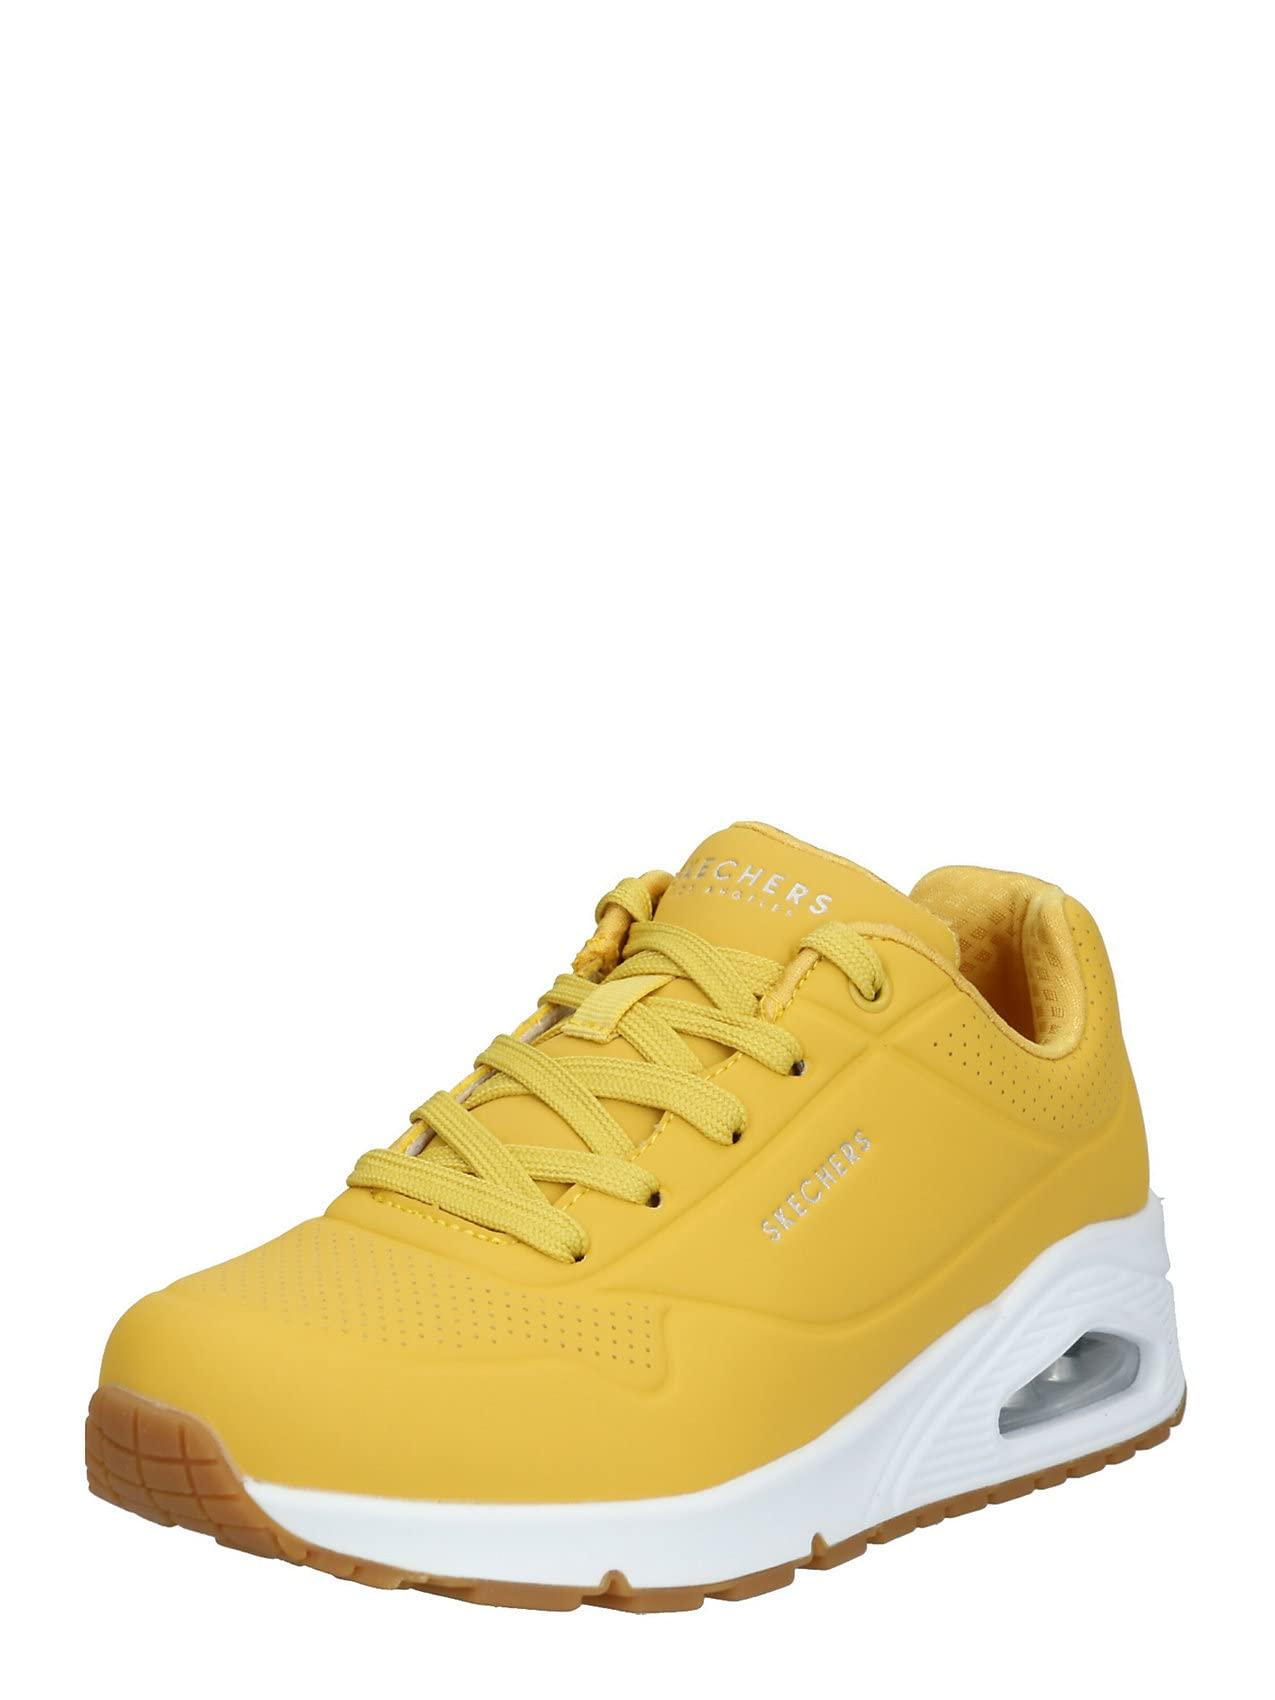 Skechers Uno Stand On Air Sneaker in Yellow - Save 51% | Lyst